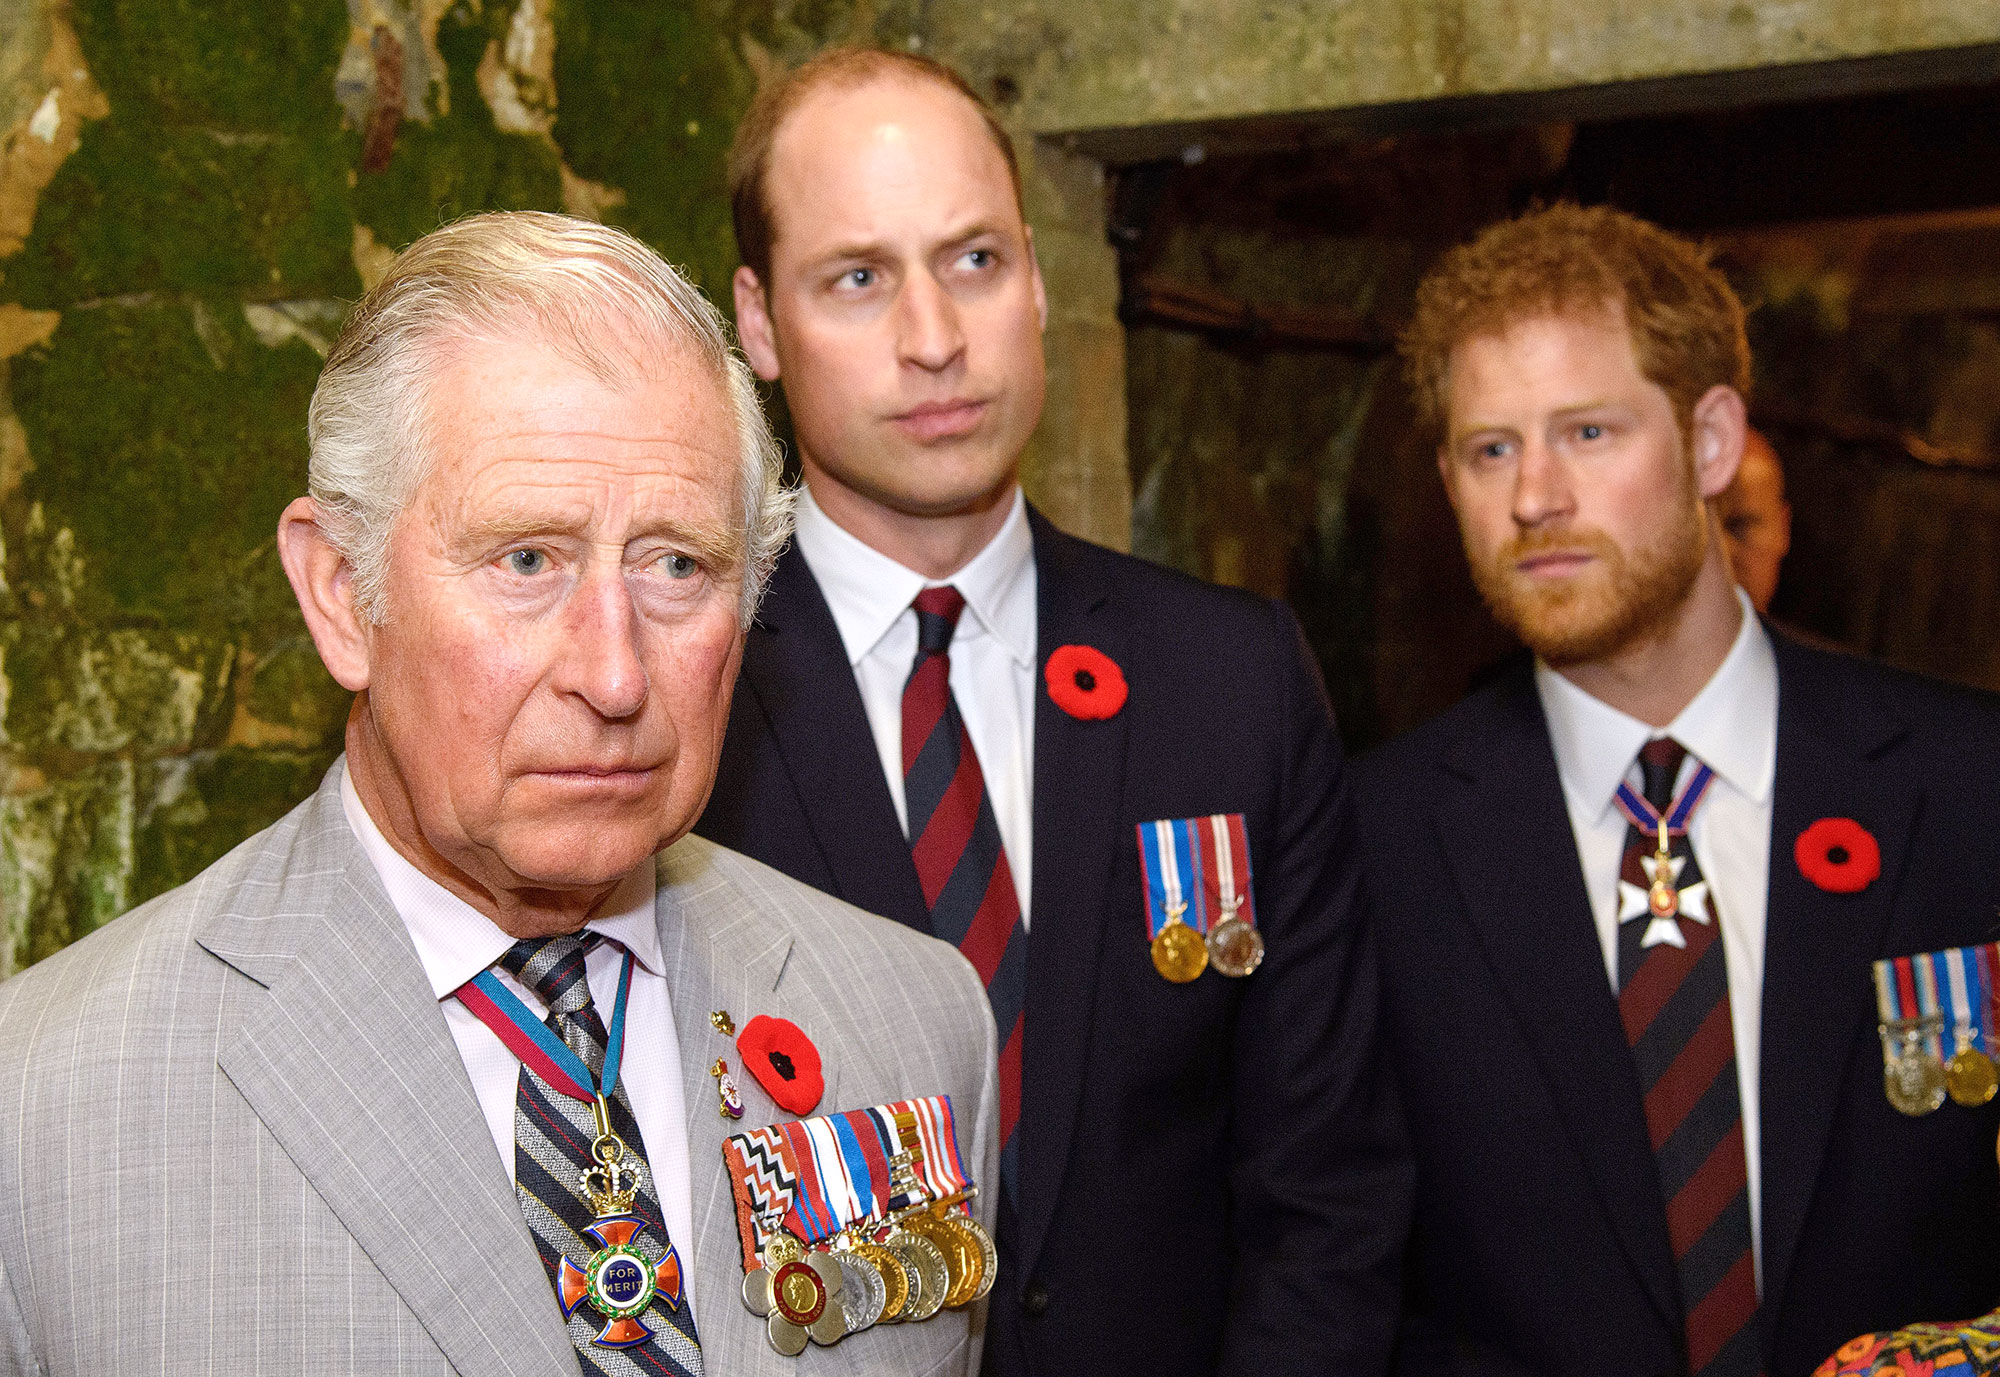 Harry Recalls 'Terrifying' Screaming Match With William, Charles Over Exit